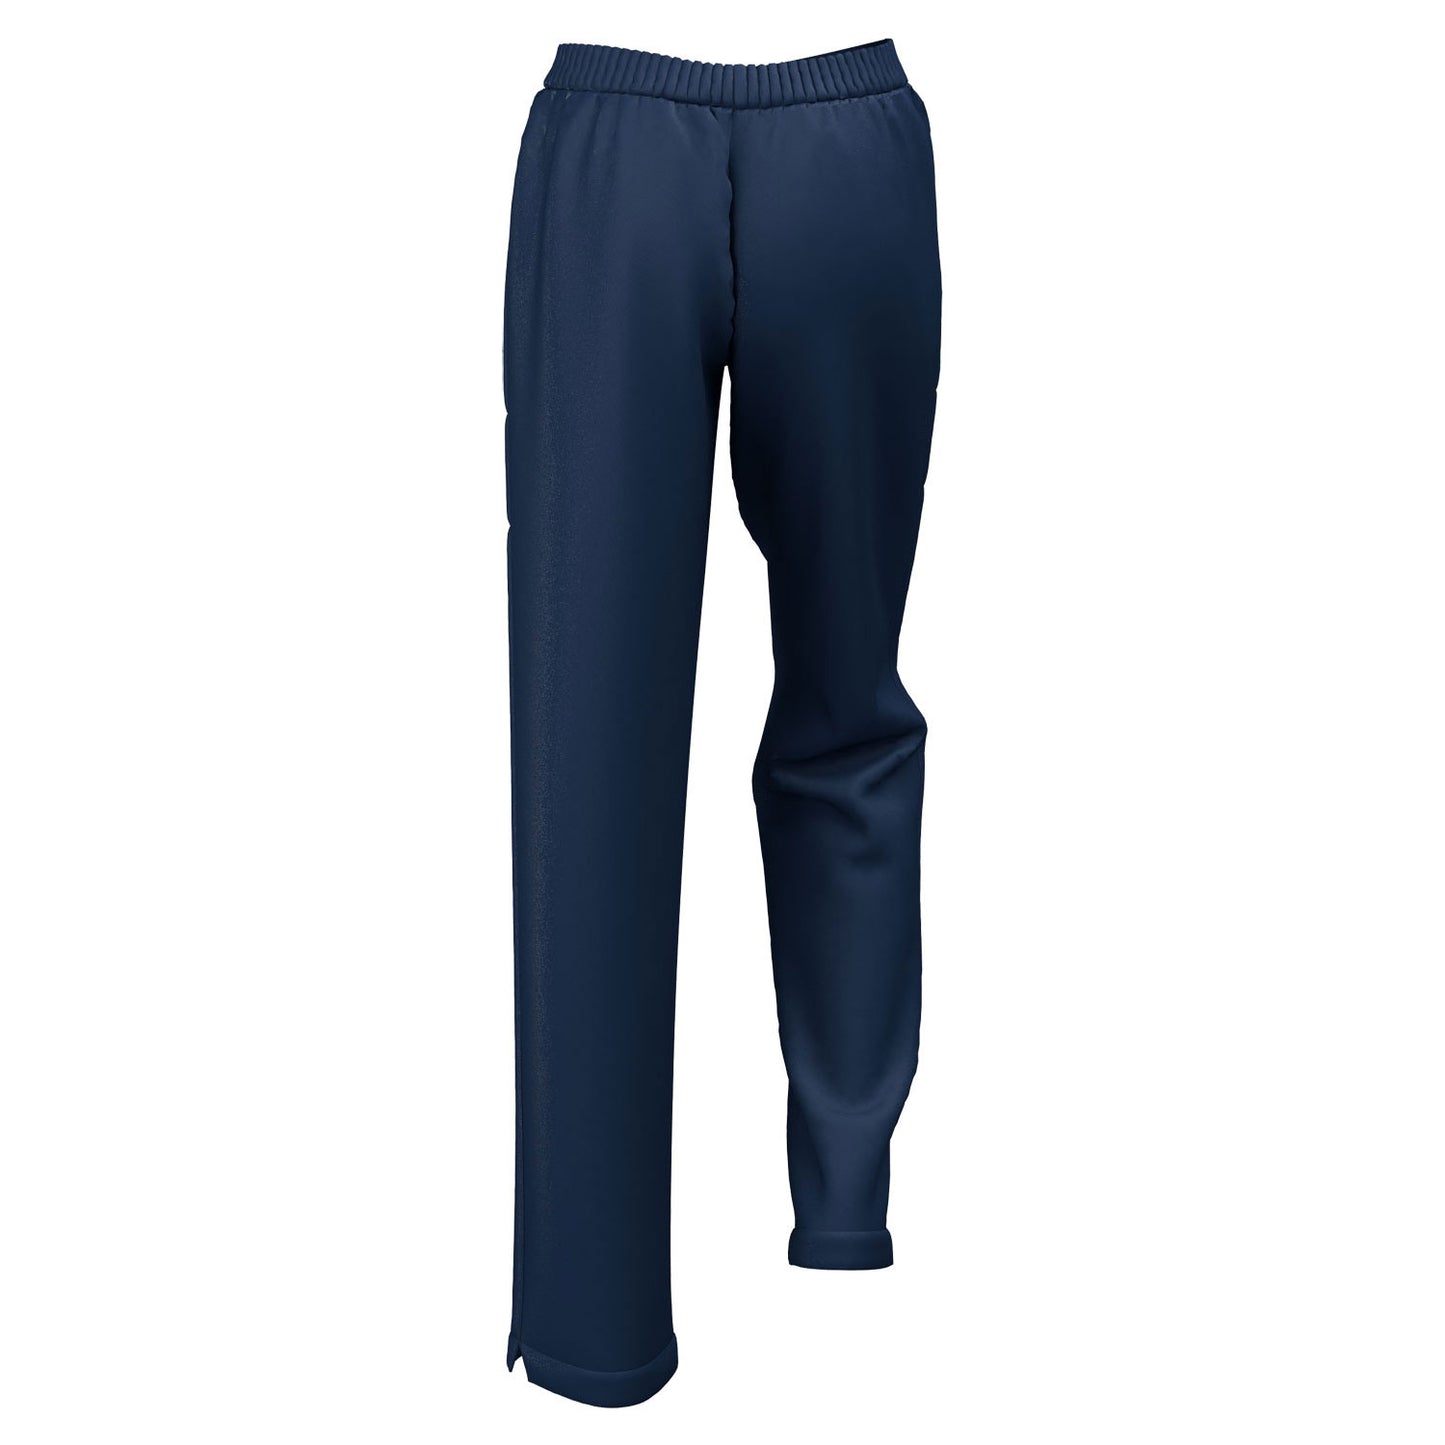 Homerton College Women's Fit Standard Tracksuit Trousers